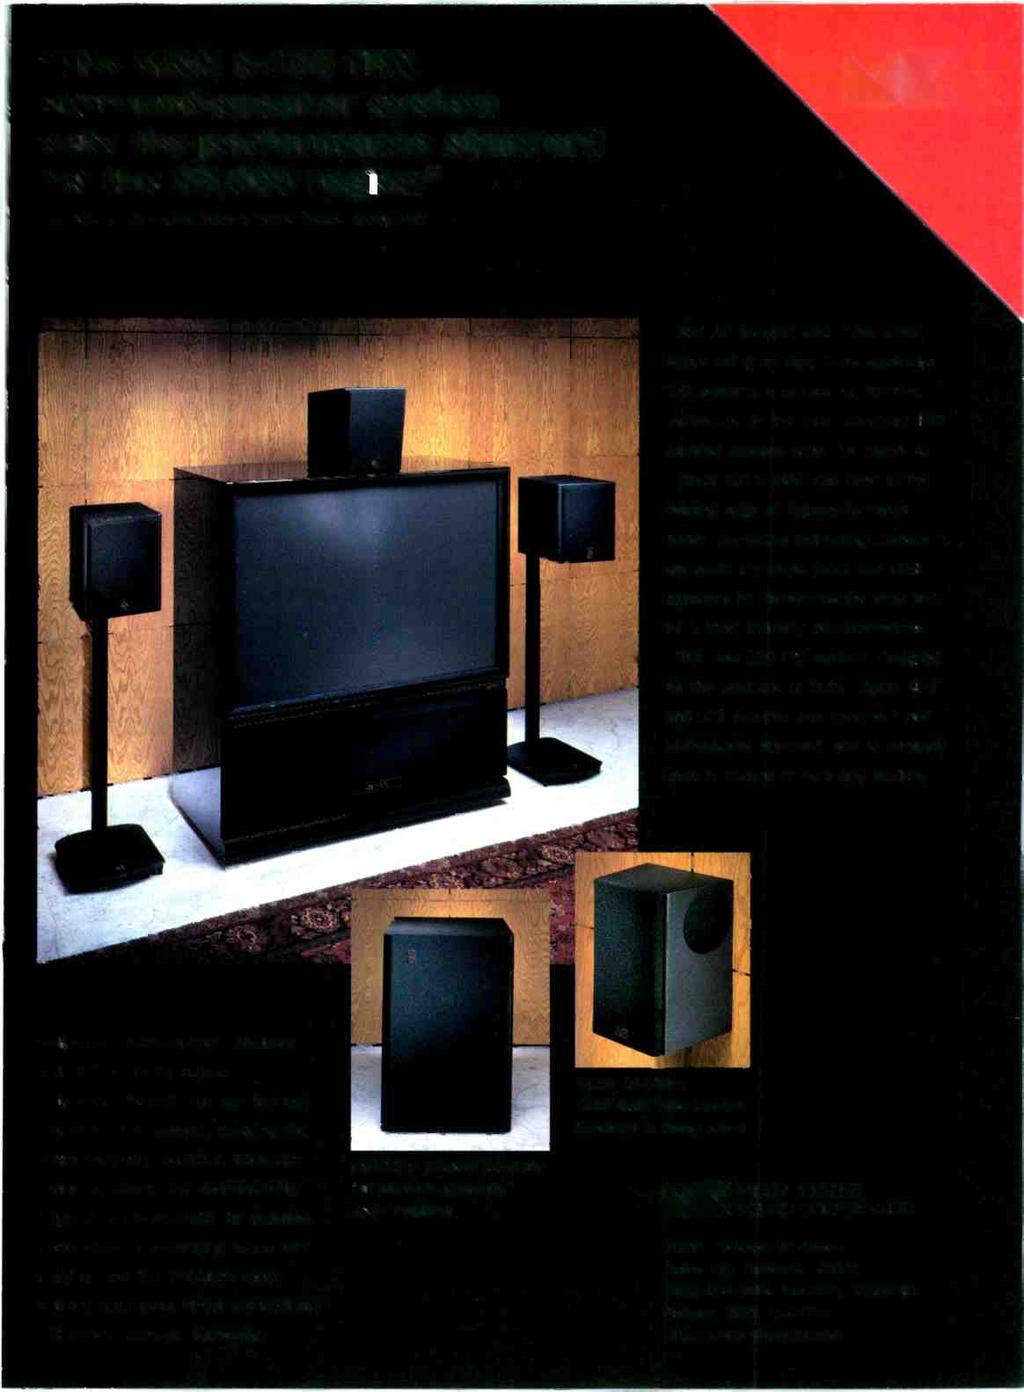 "The M&K S-150 THX surround -speaker system sets the performance standard for the $5,000 region" Wes Prillips, Stereophile Guide to Home Theater, Sprirg 1997 And AV Shopper said, "This M&K lineup